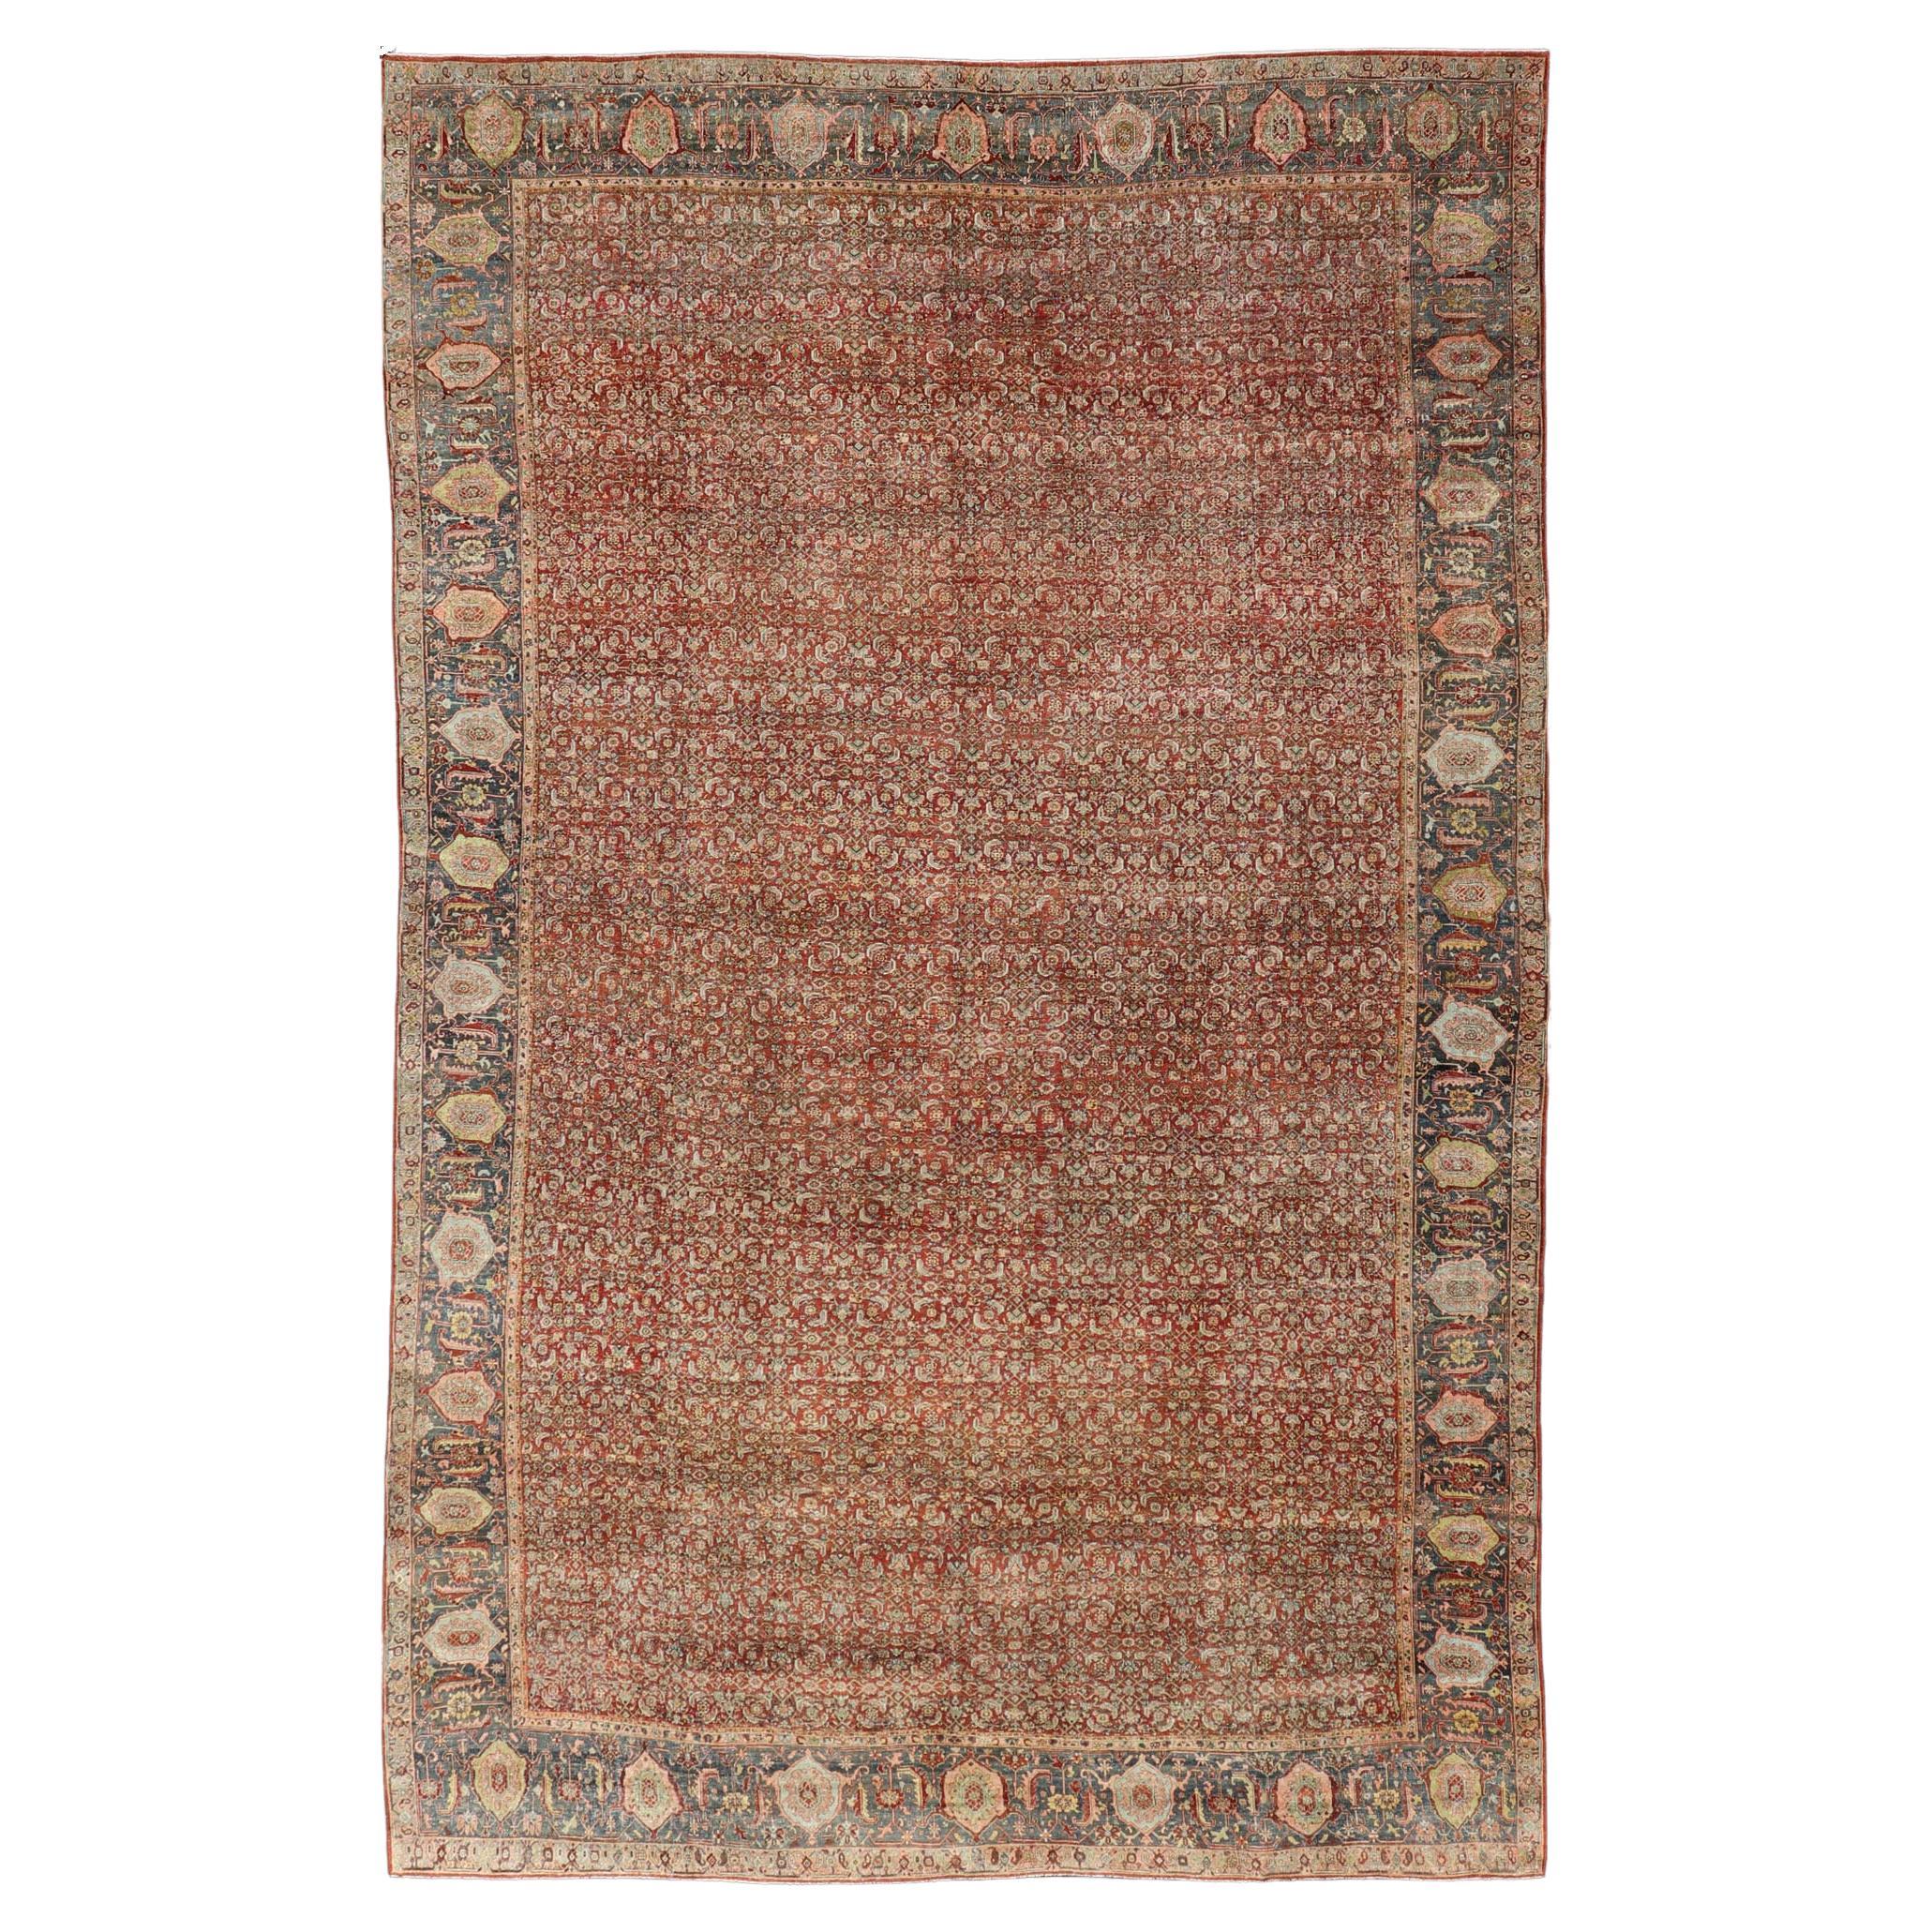 Palace Size Antique Persian Bidjar Rug in Shades of Red, Blue Grey & Lime Green For Sale